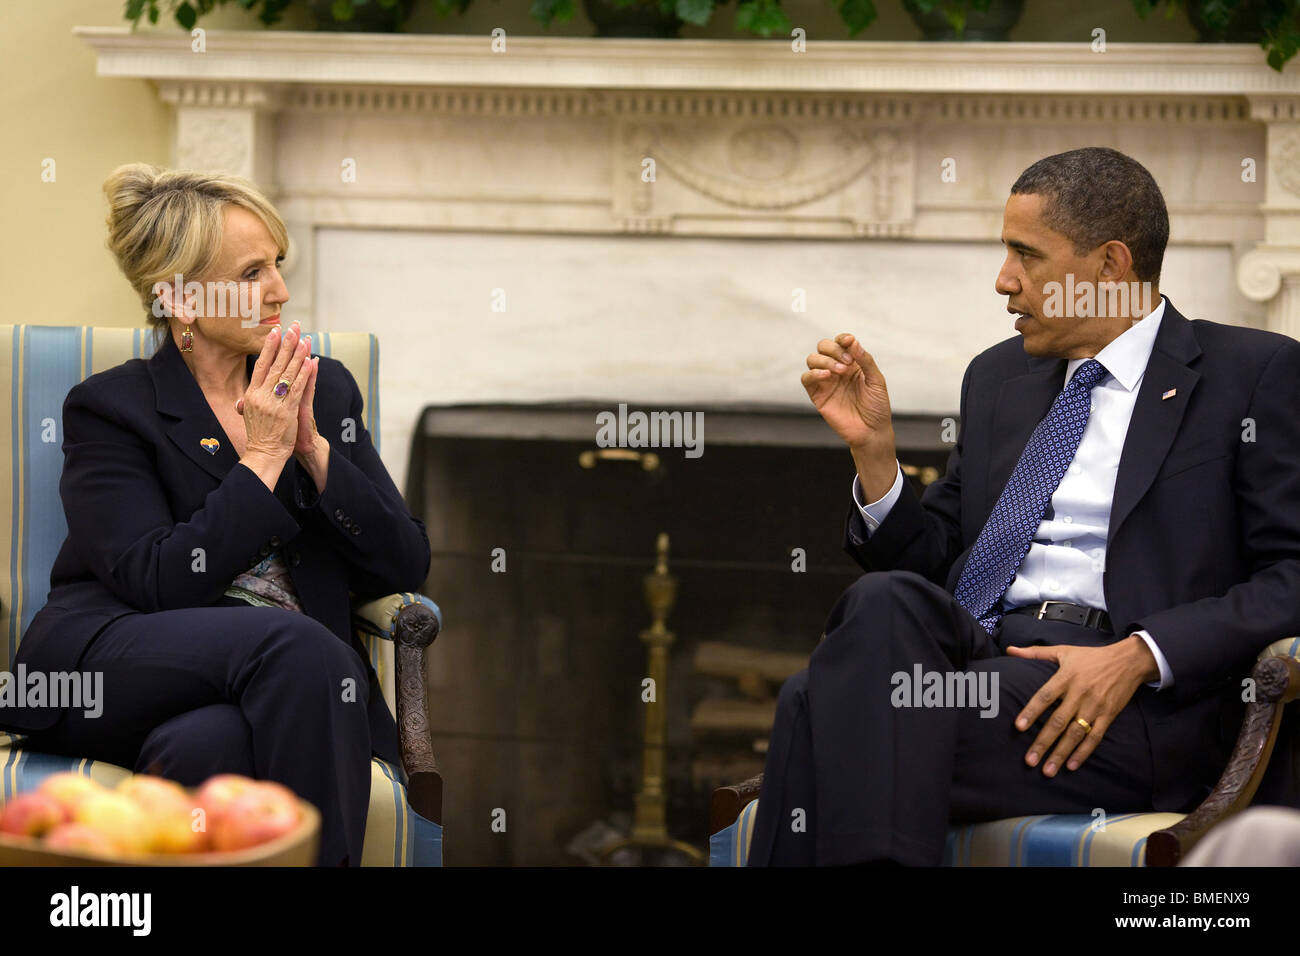 President Barack Obama meets with Arizona Gov. Jan Brewer in the Oval Office, June 3, 2010. Stock Photo